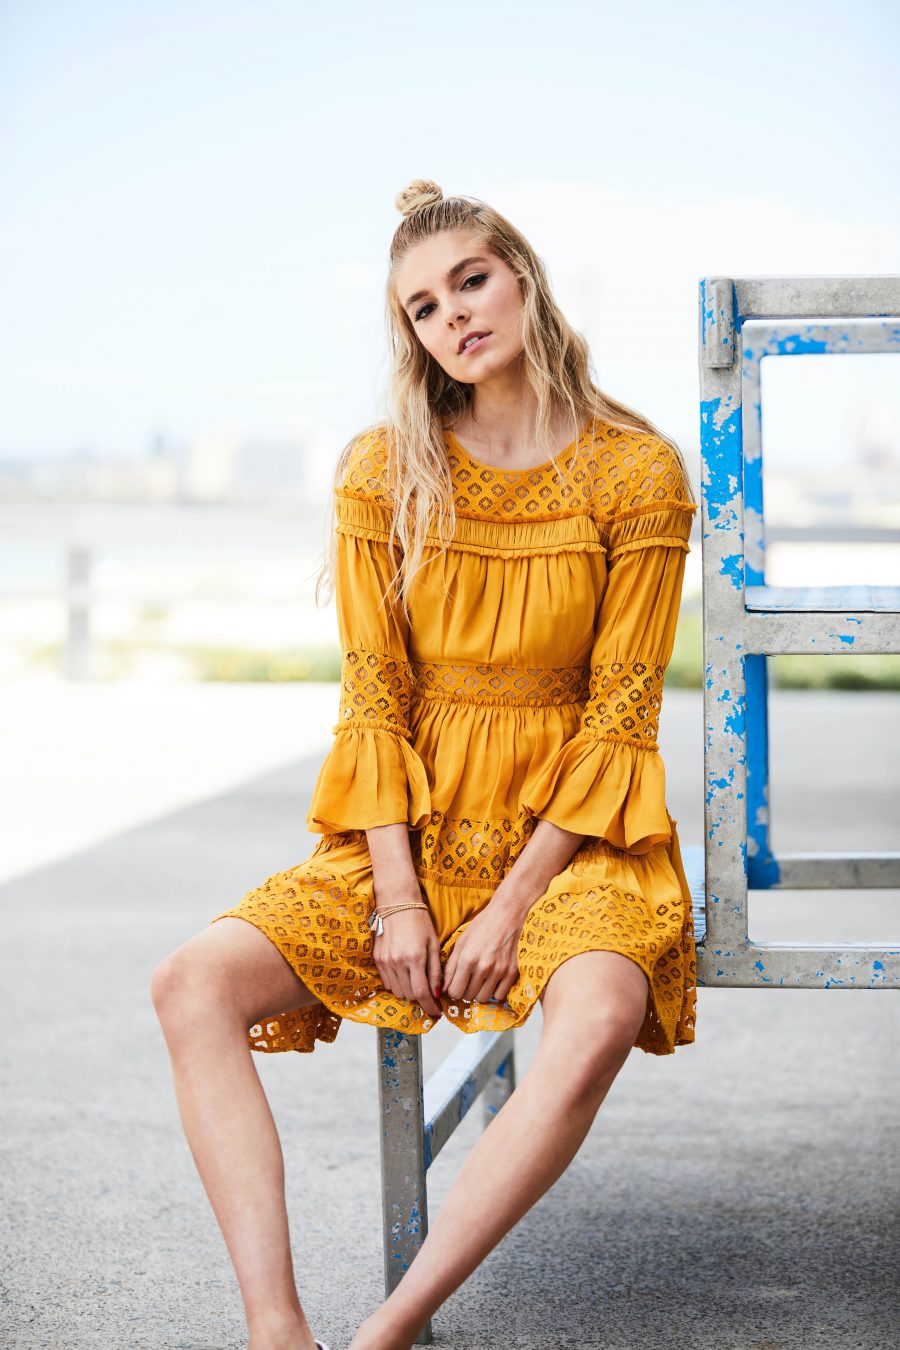 See Need Want Fashion Summer Street Style Trends Colour Yellow Pretty Dress 5